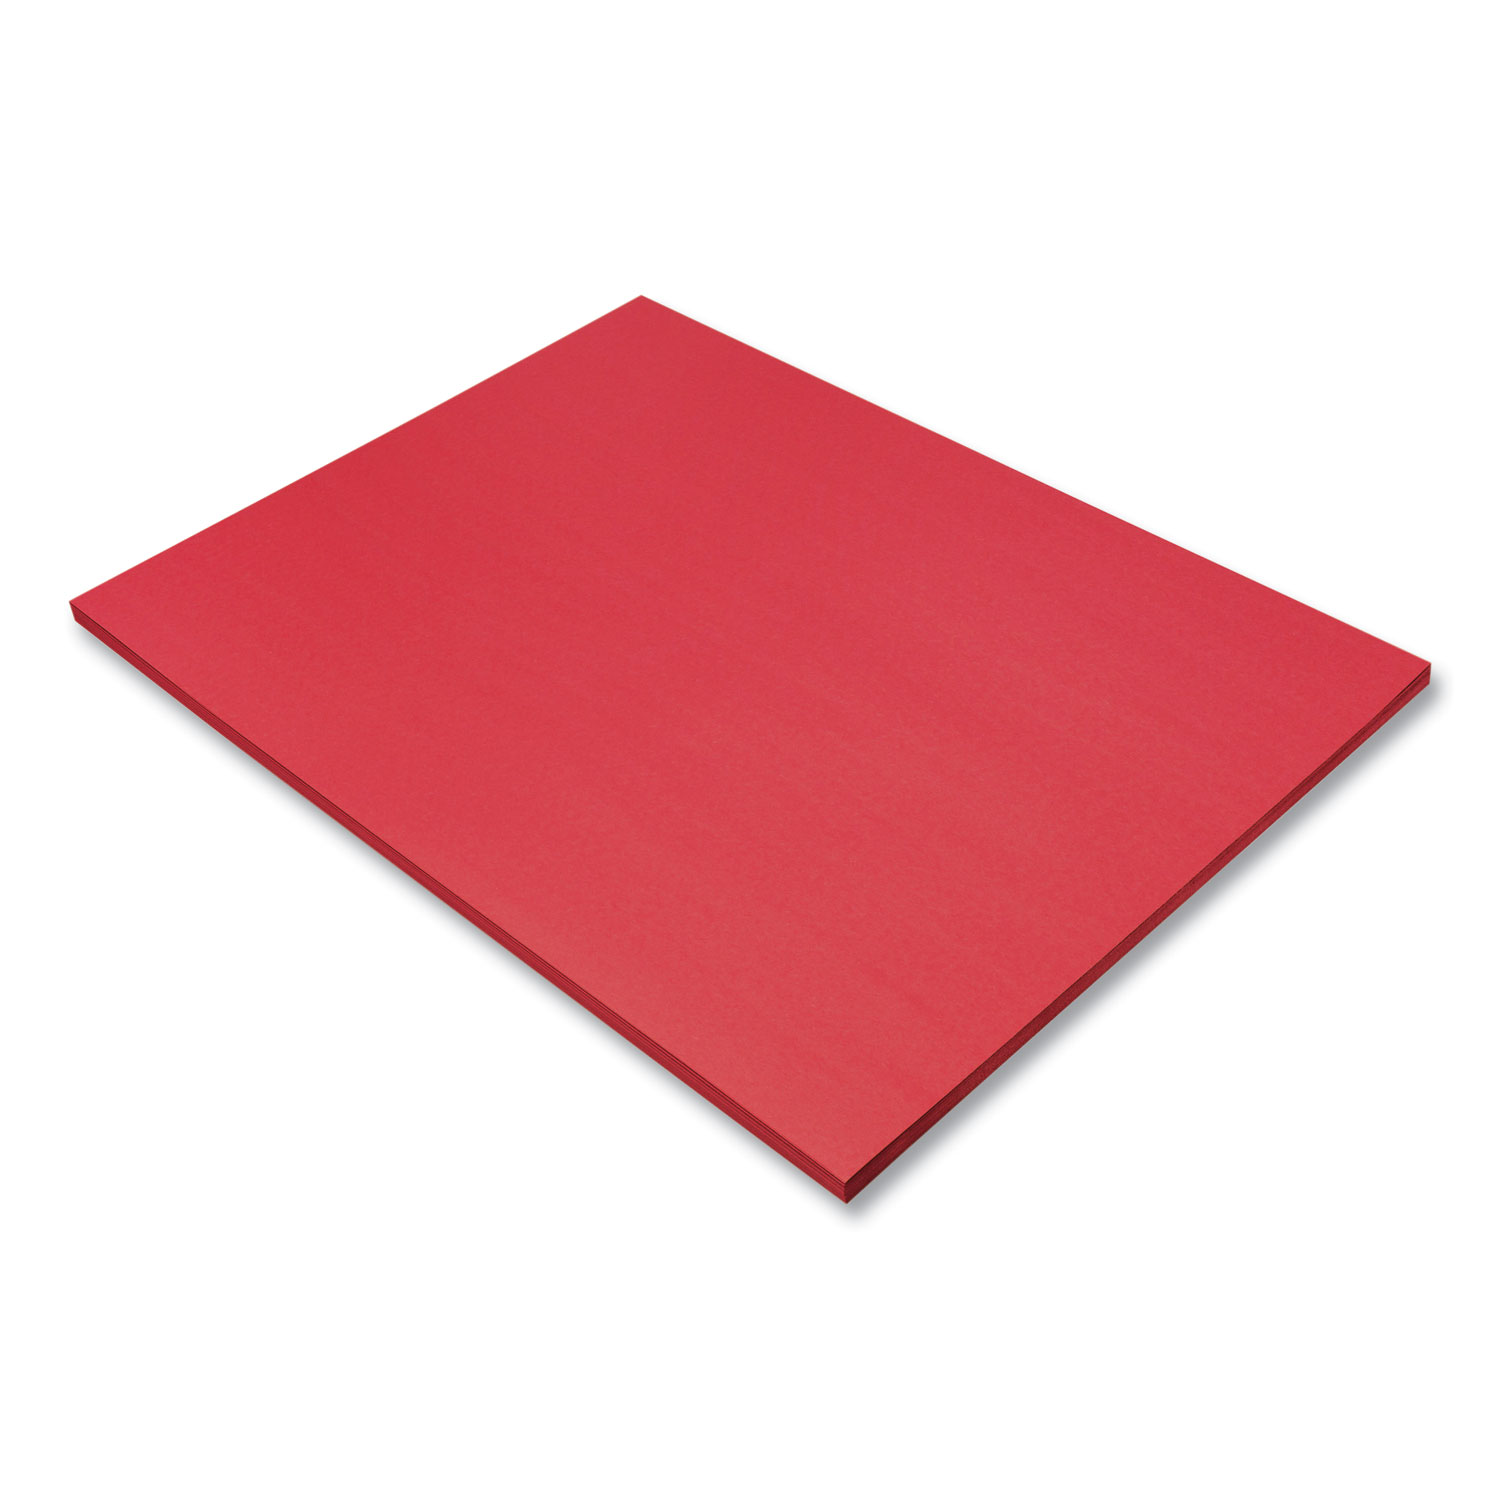 SunWorks Construction Paper, 58 lbs., 12 x 18, Hot Pink, 50 Sheets/Pack